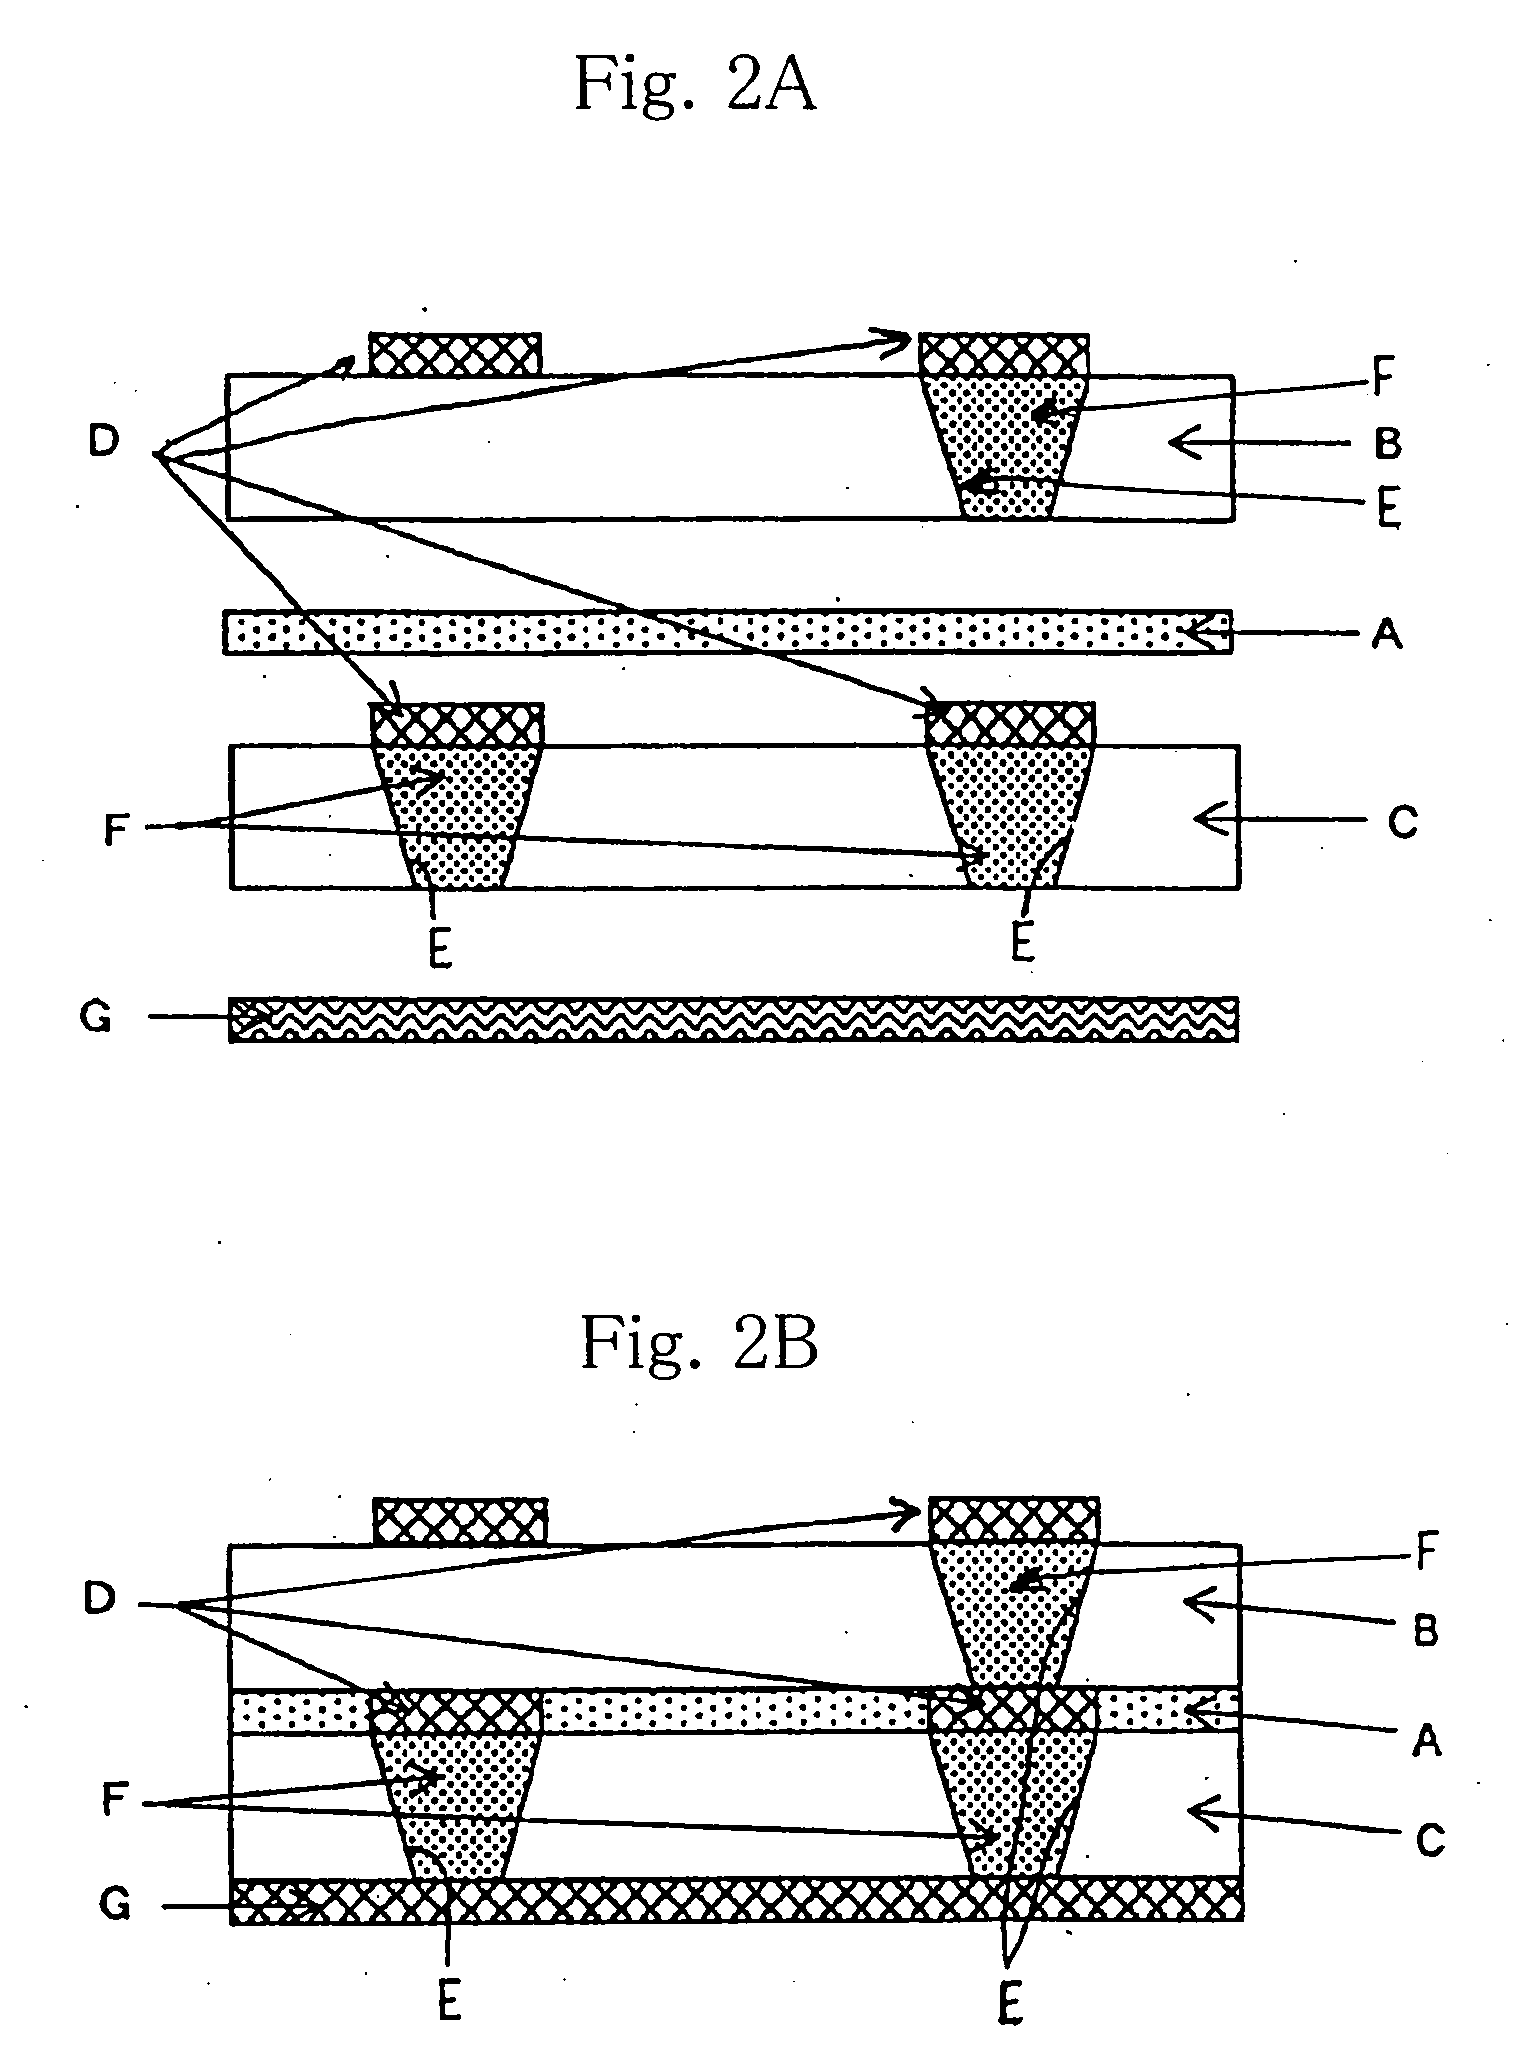 Multi-layer circuit board and method of making the same